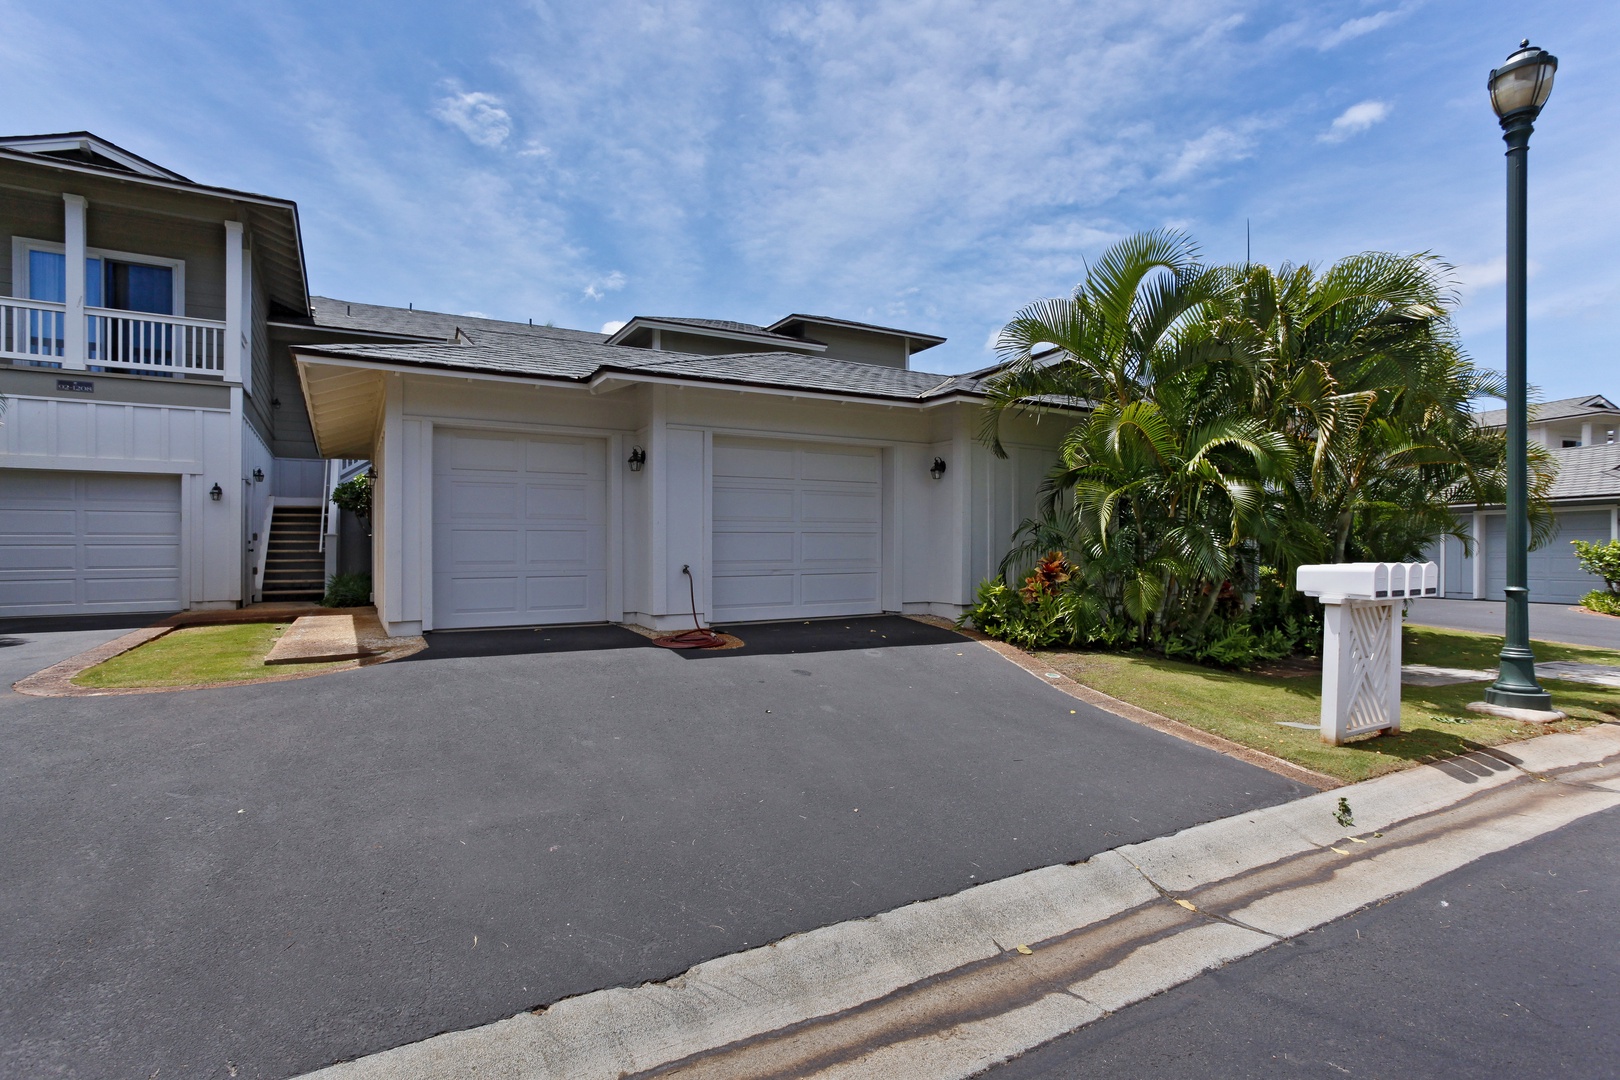 Kapolei Vacation Rentals, Coconut Plantation 1208-2 - The paved area and garage of the condo.